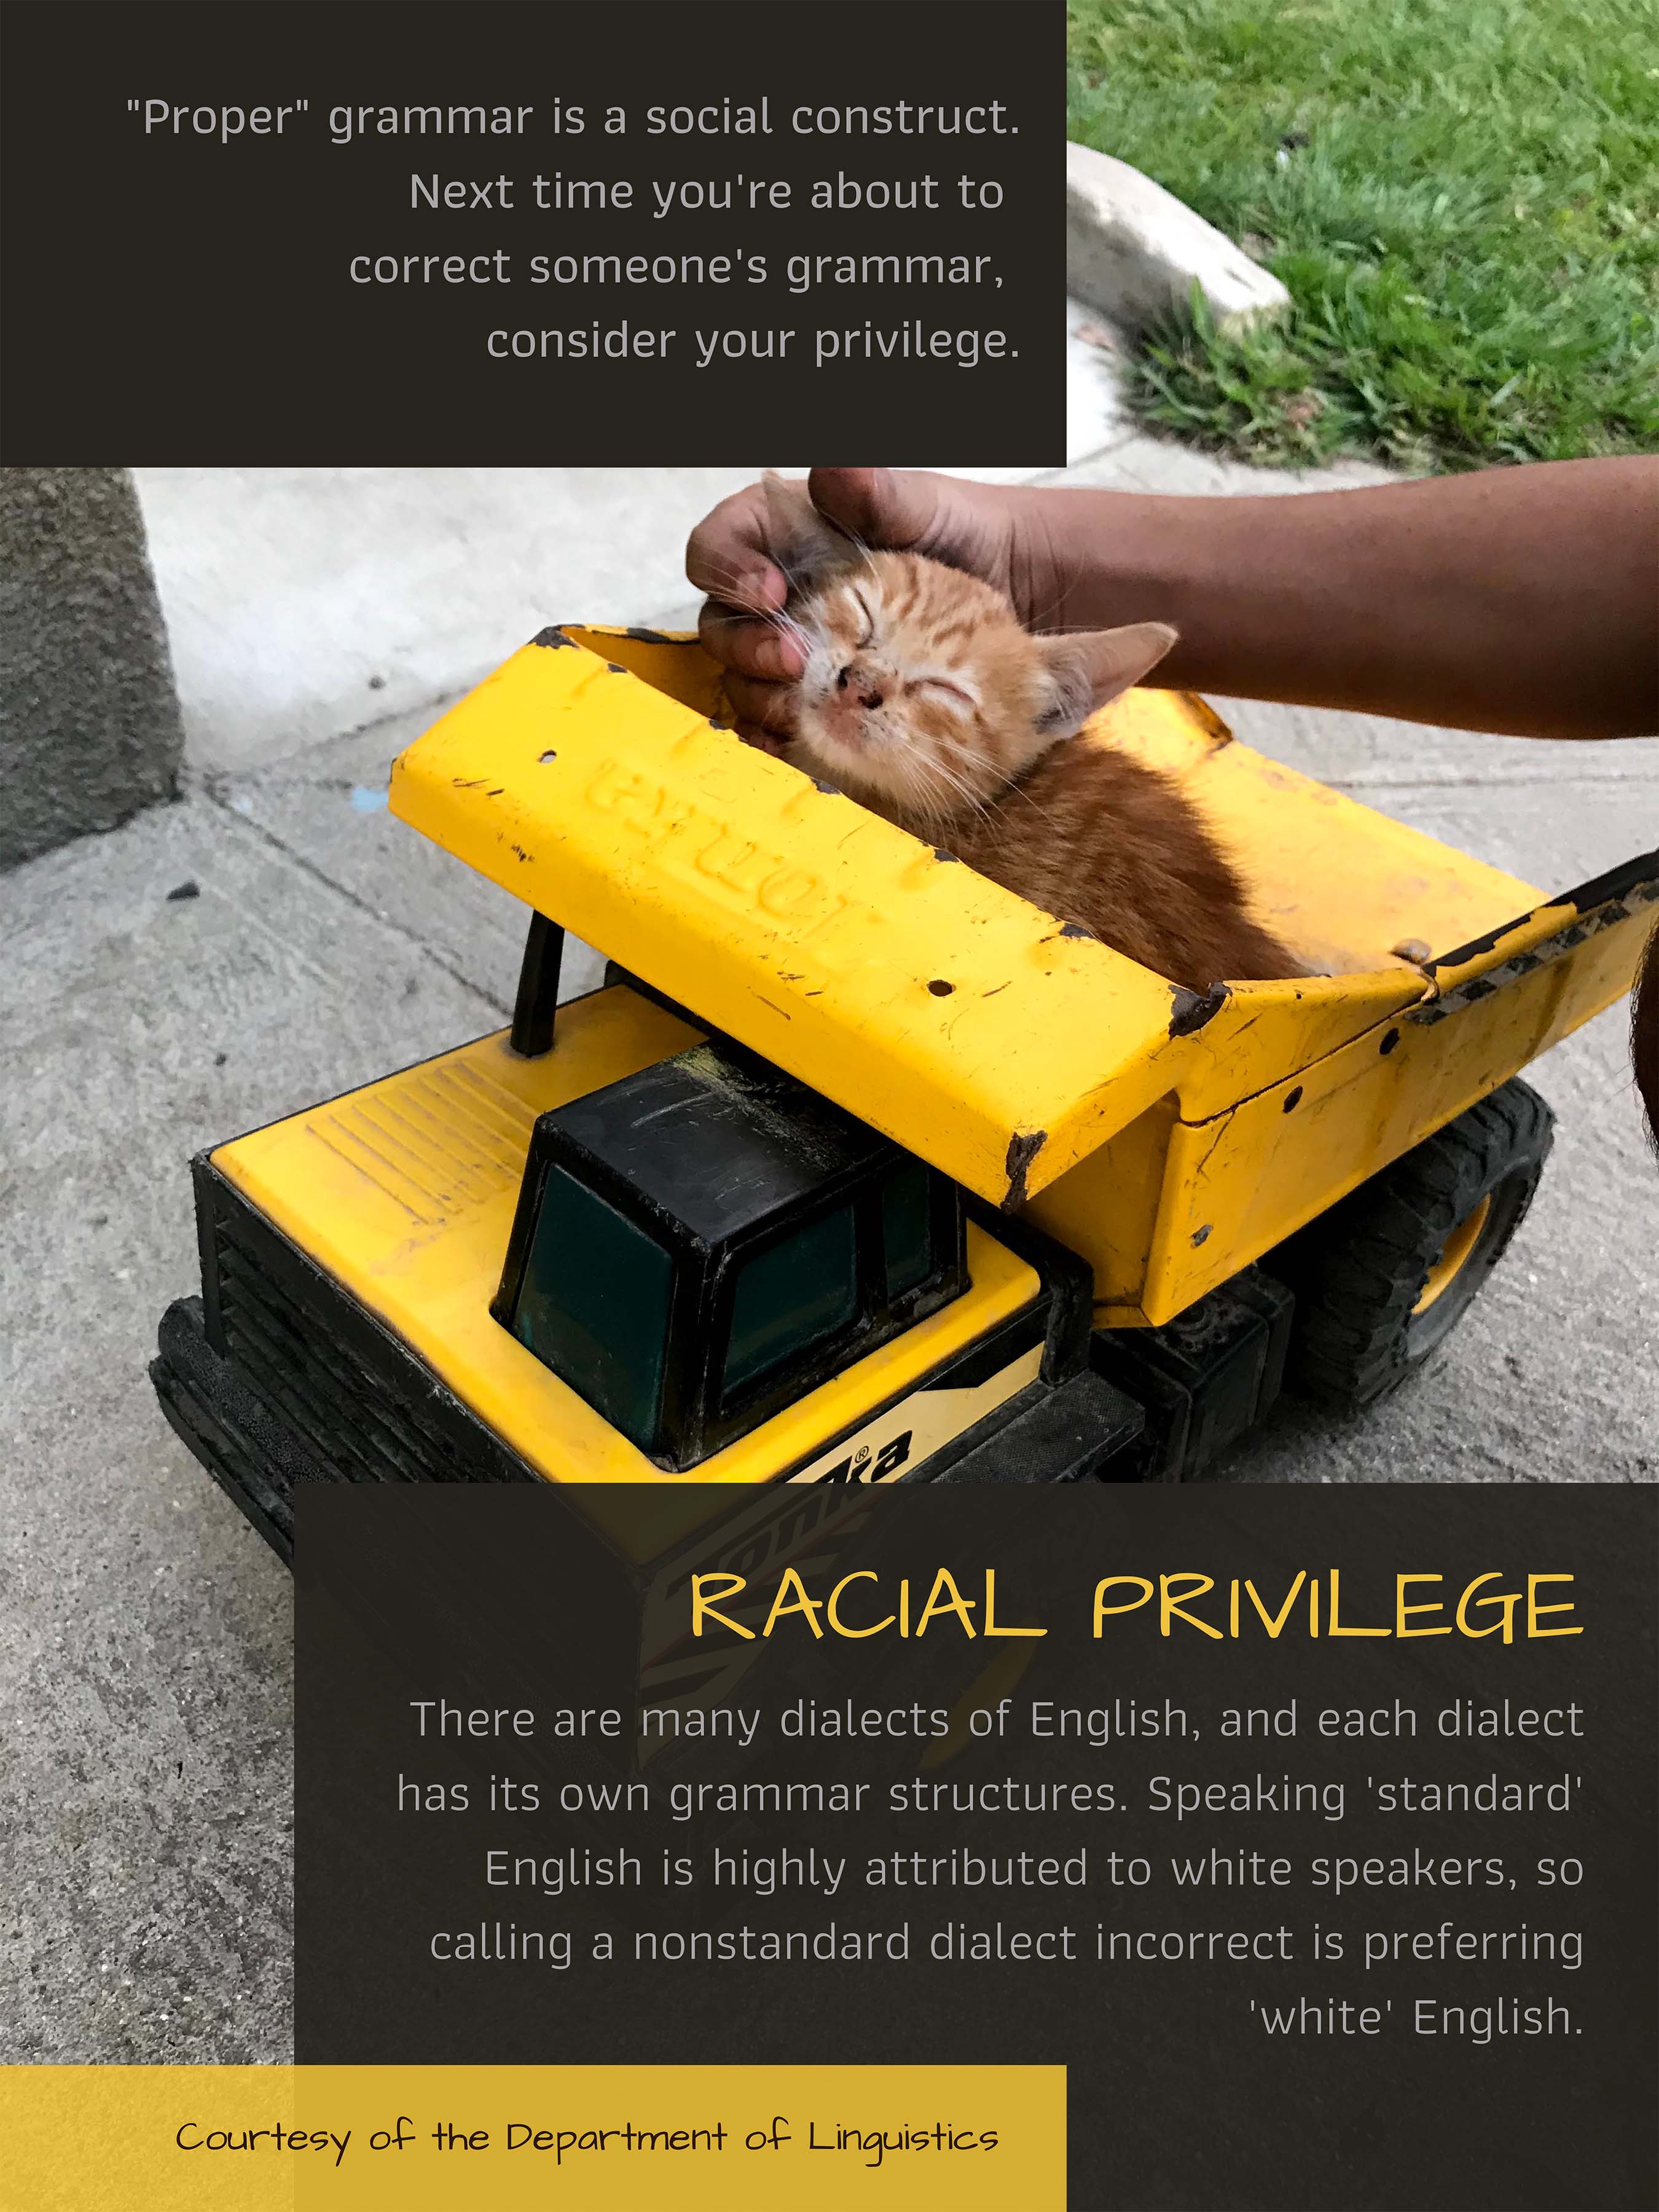 Don't be a grammar snob. Consider your racial privilege. Click on image for full description.